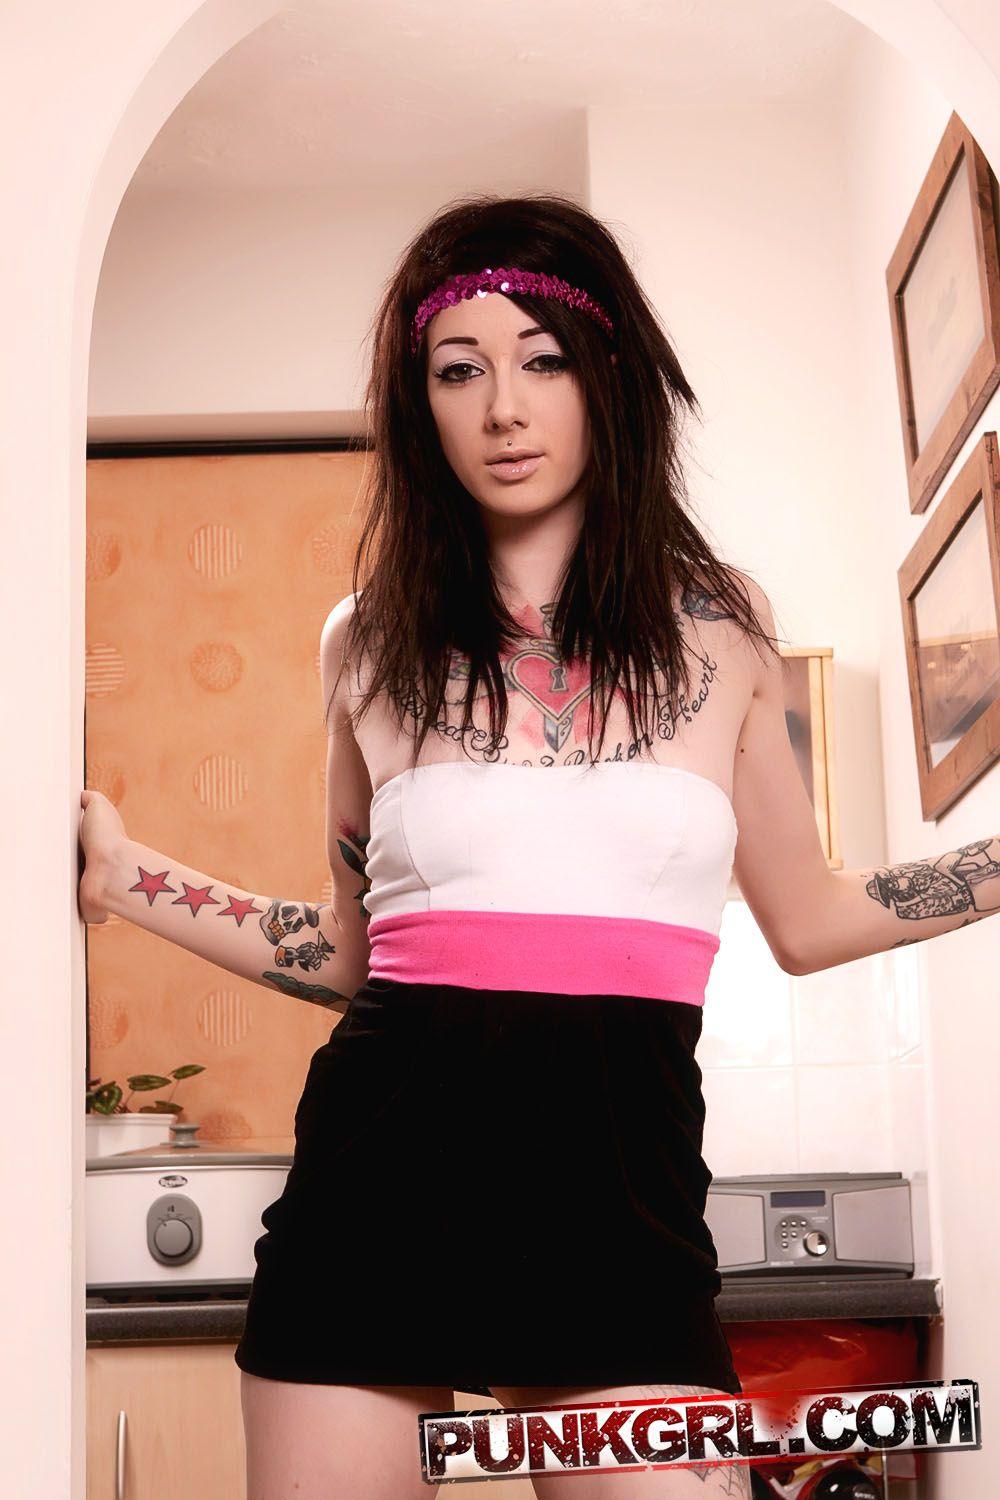 Pictures of tattooed princess Hollywood getting naked in the pantry #60762844